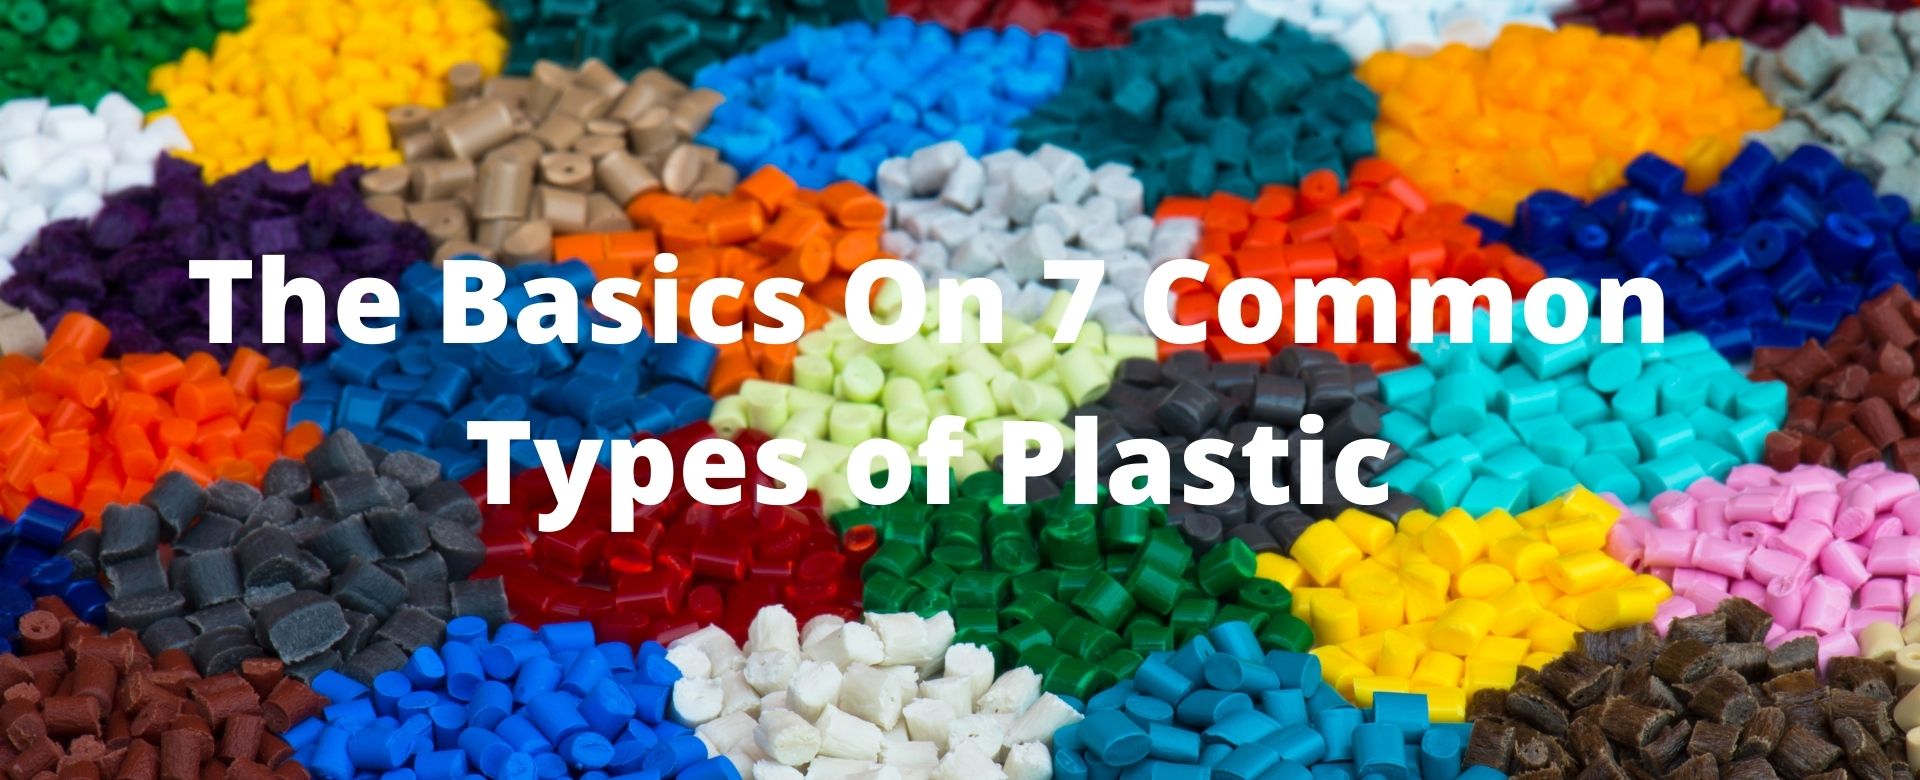 The Basics On 7 Common Types Of Plastic News And Articles